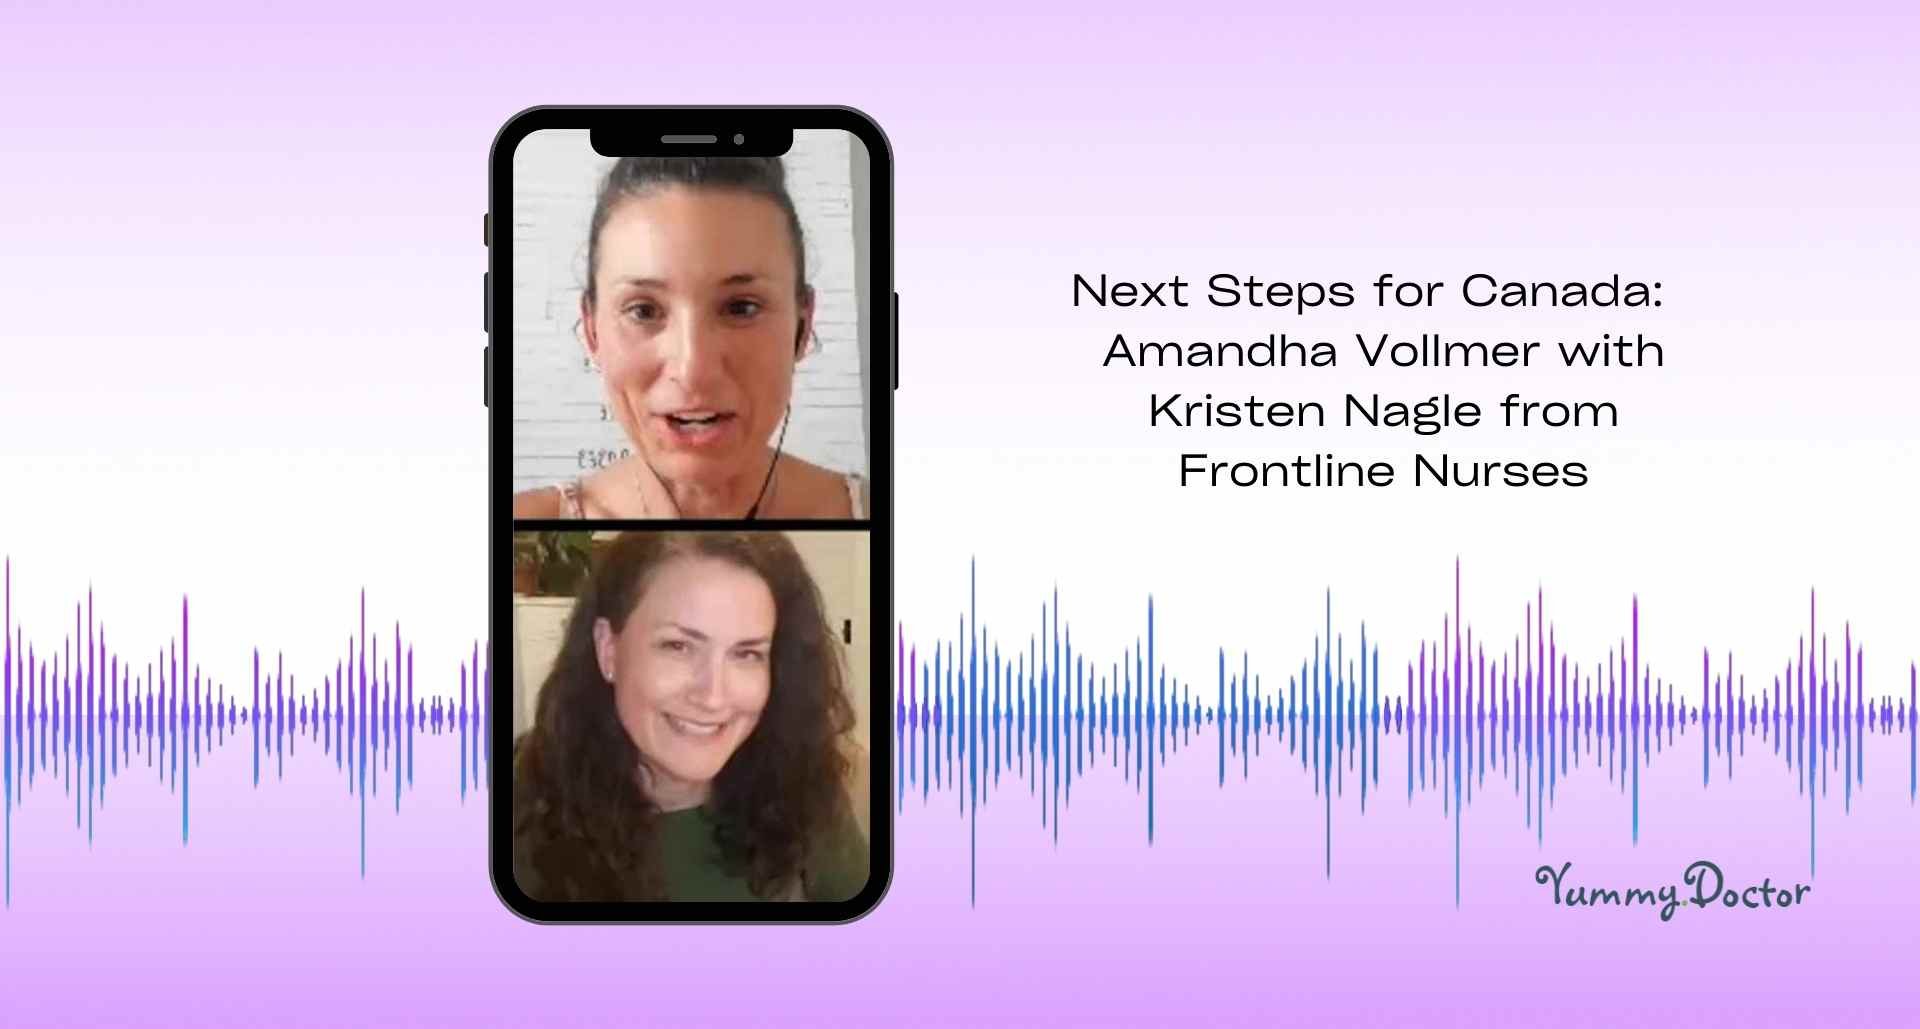 Next Steps for Canada Amandha Vollmer with Kristen Nagle from Canadian Frontline Nurses